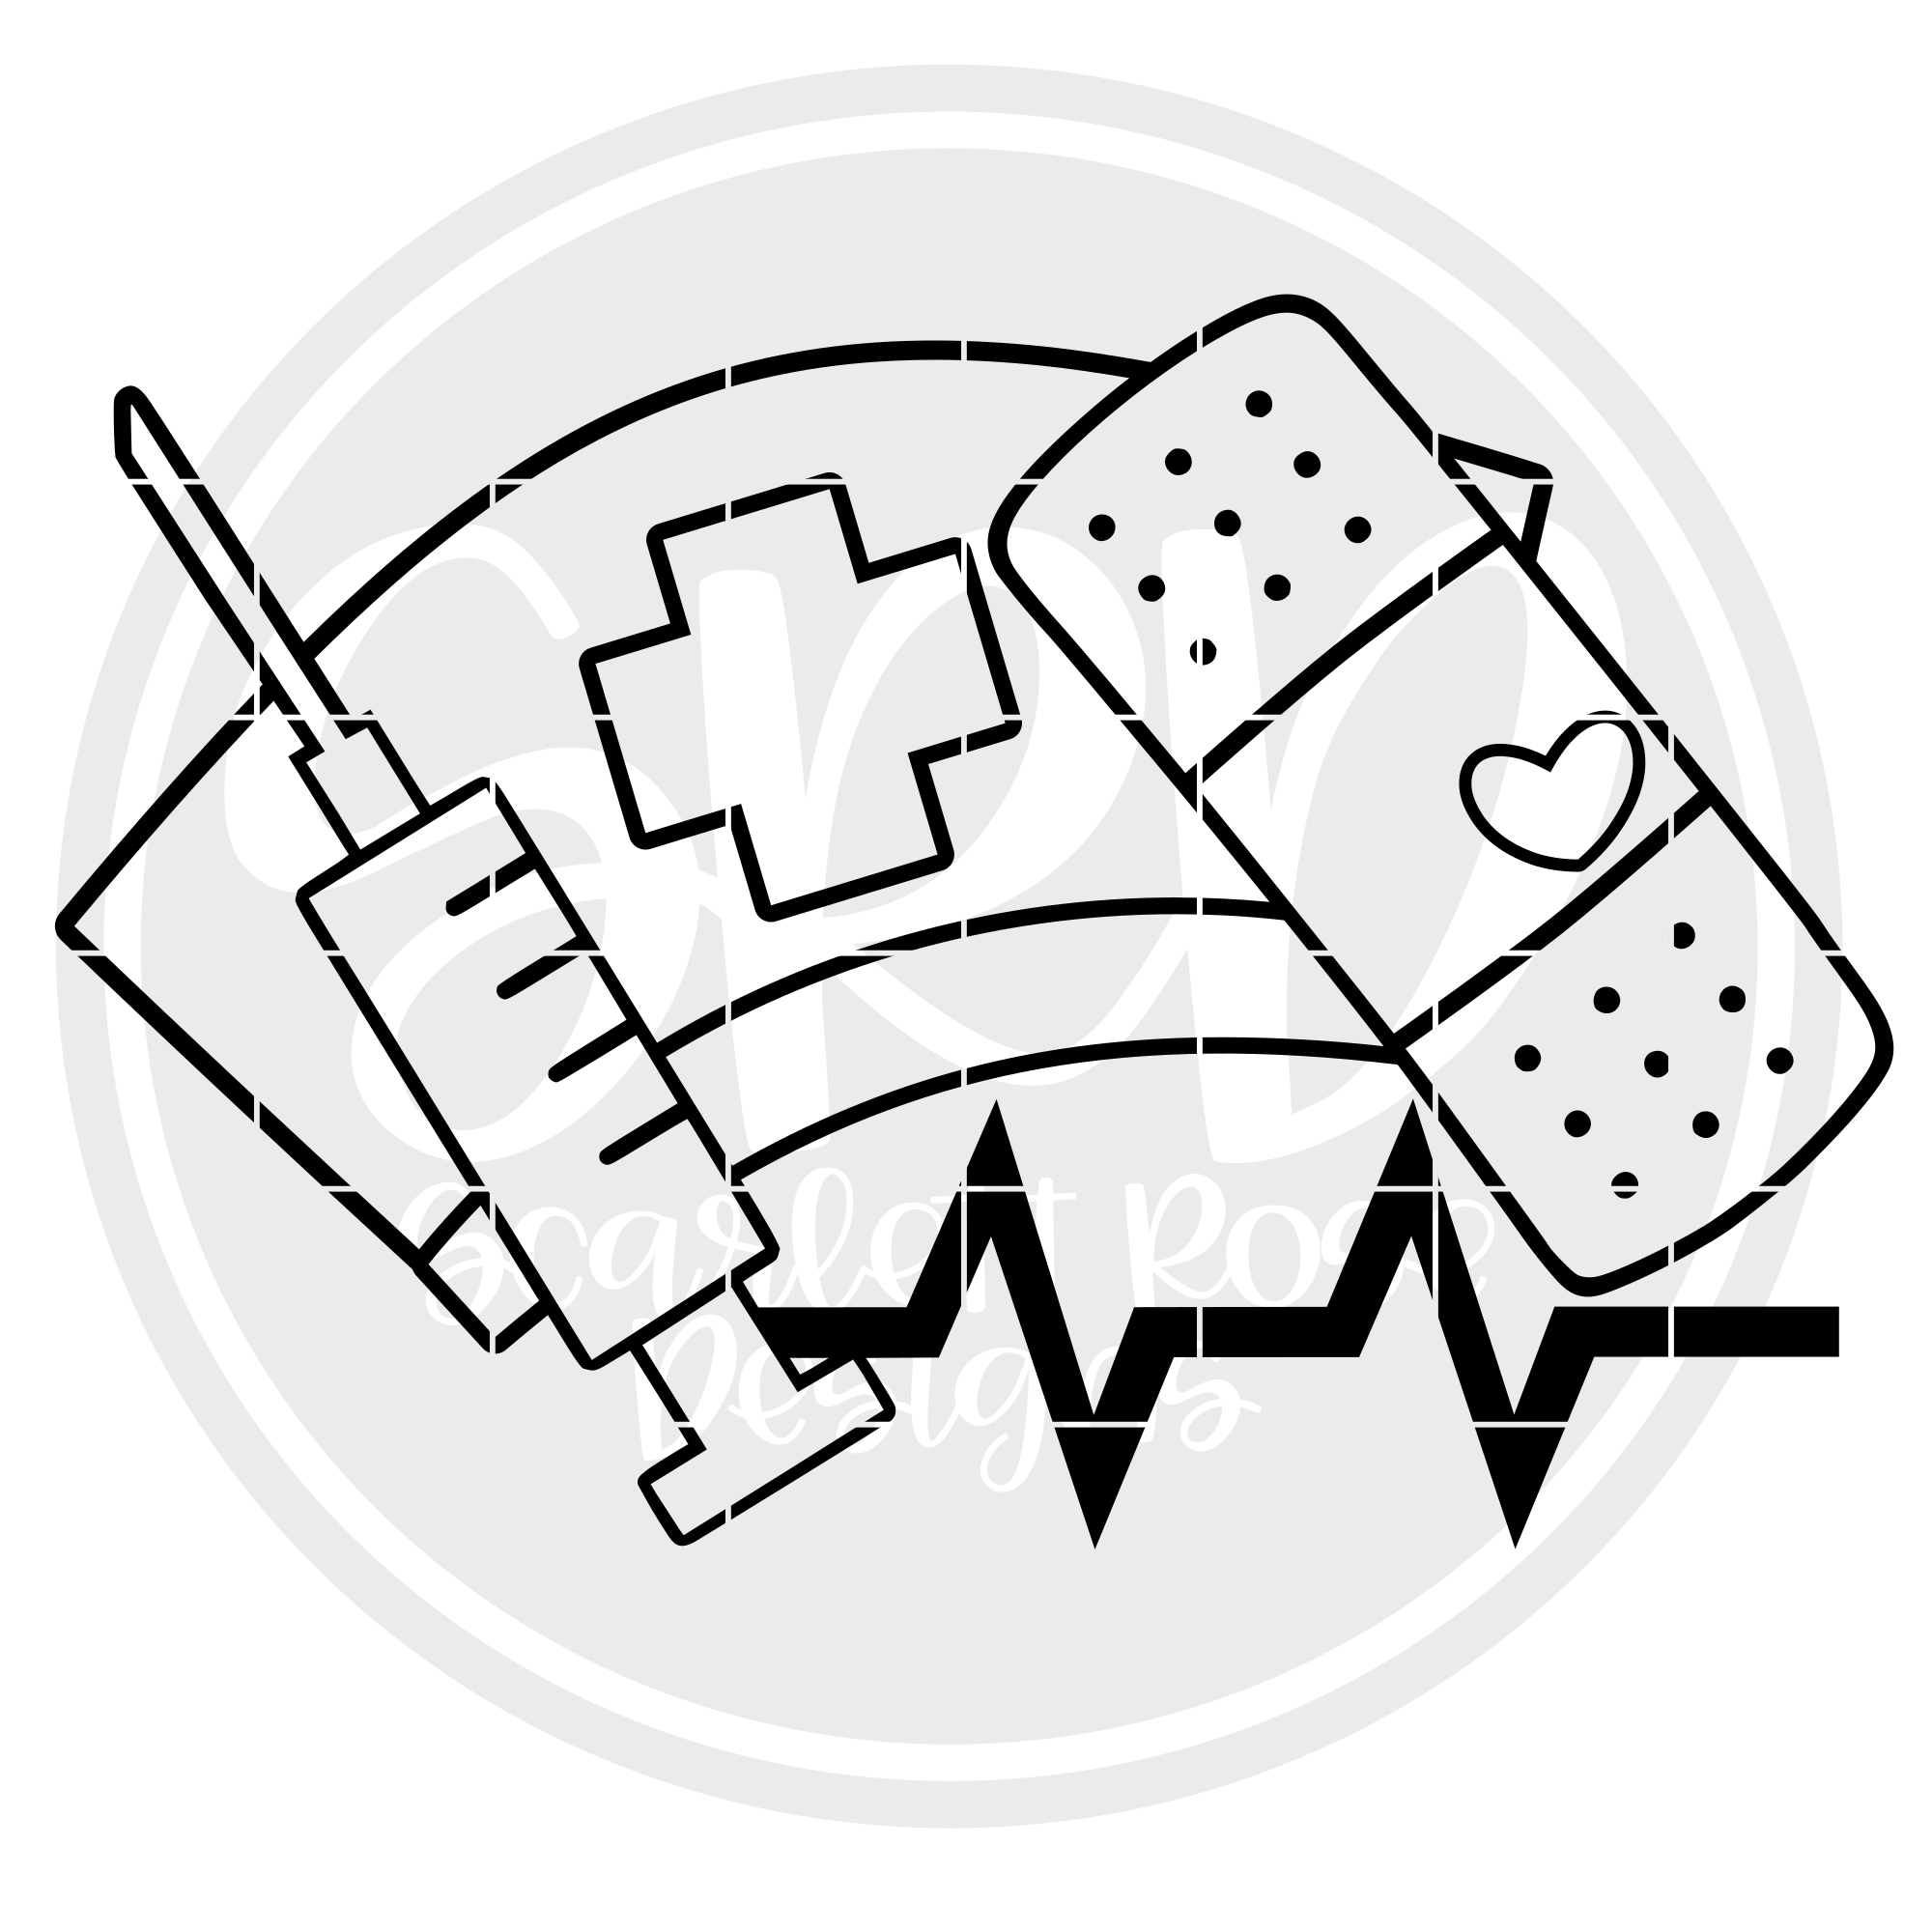 first aid kit coloring page